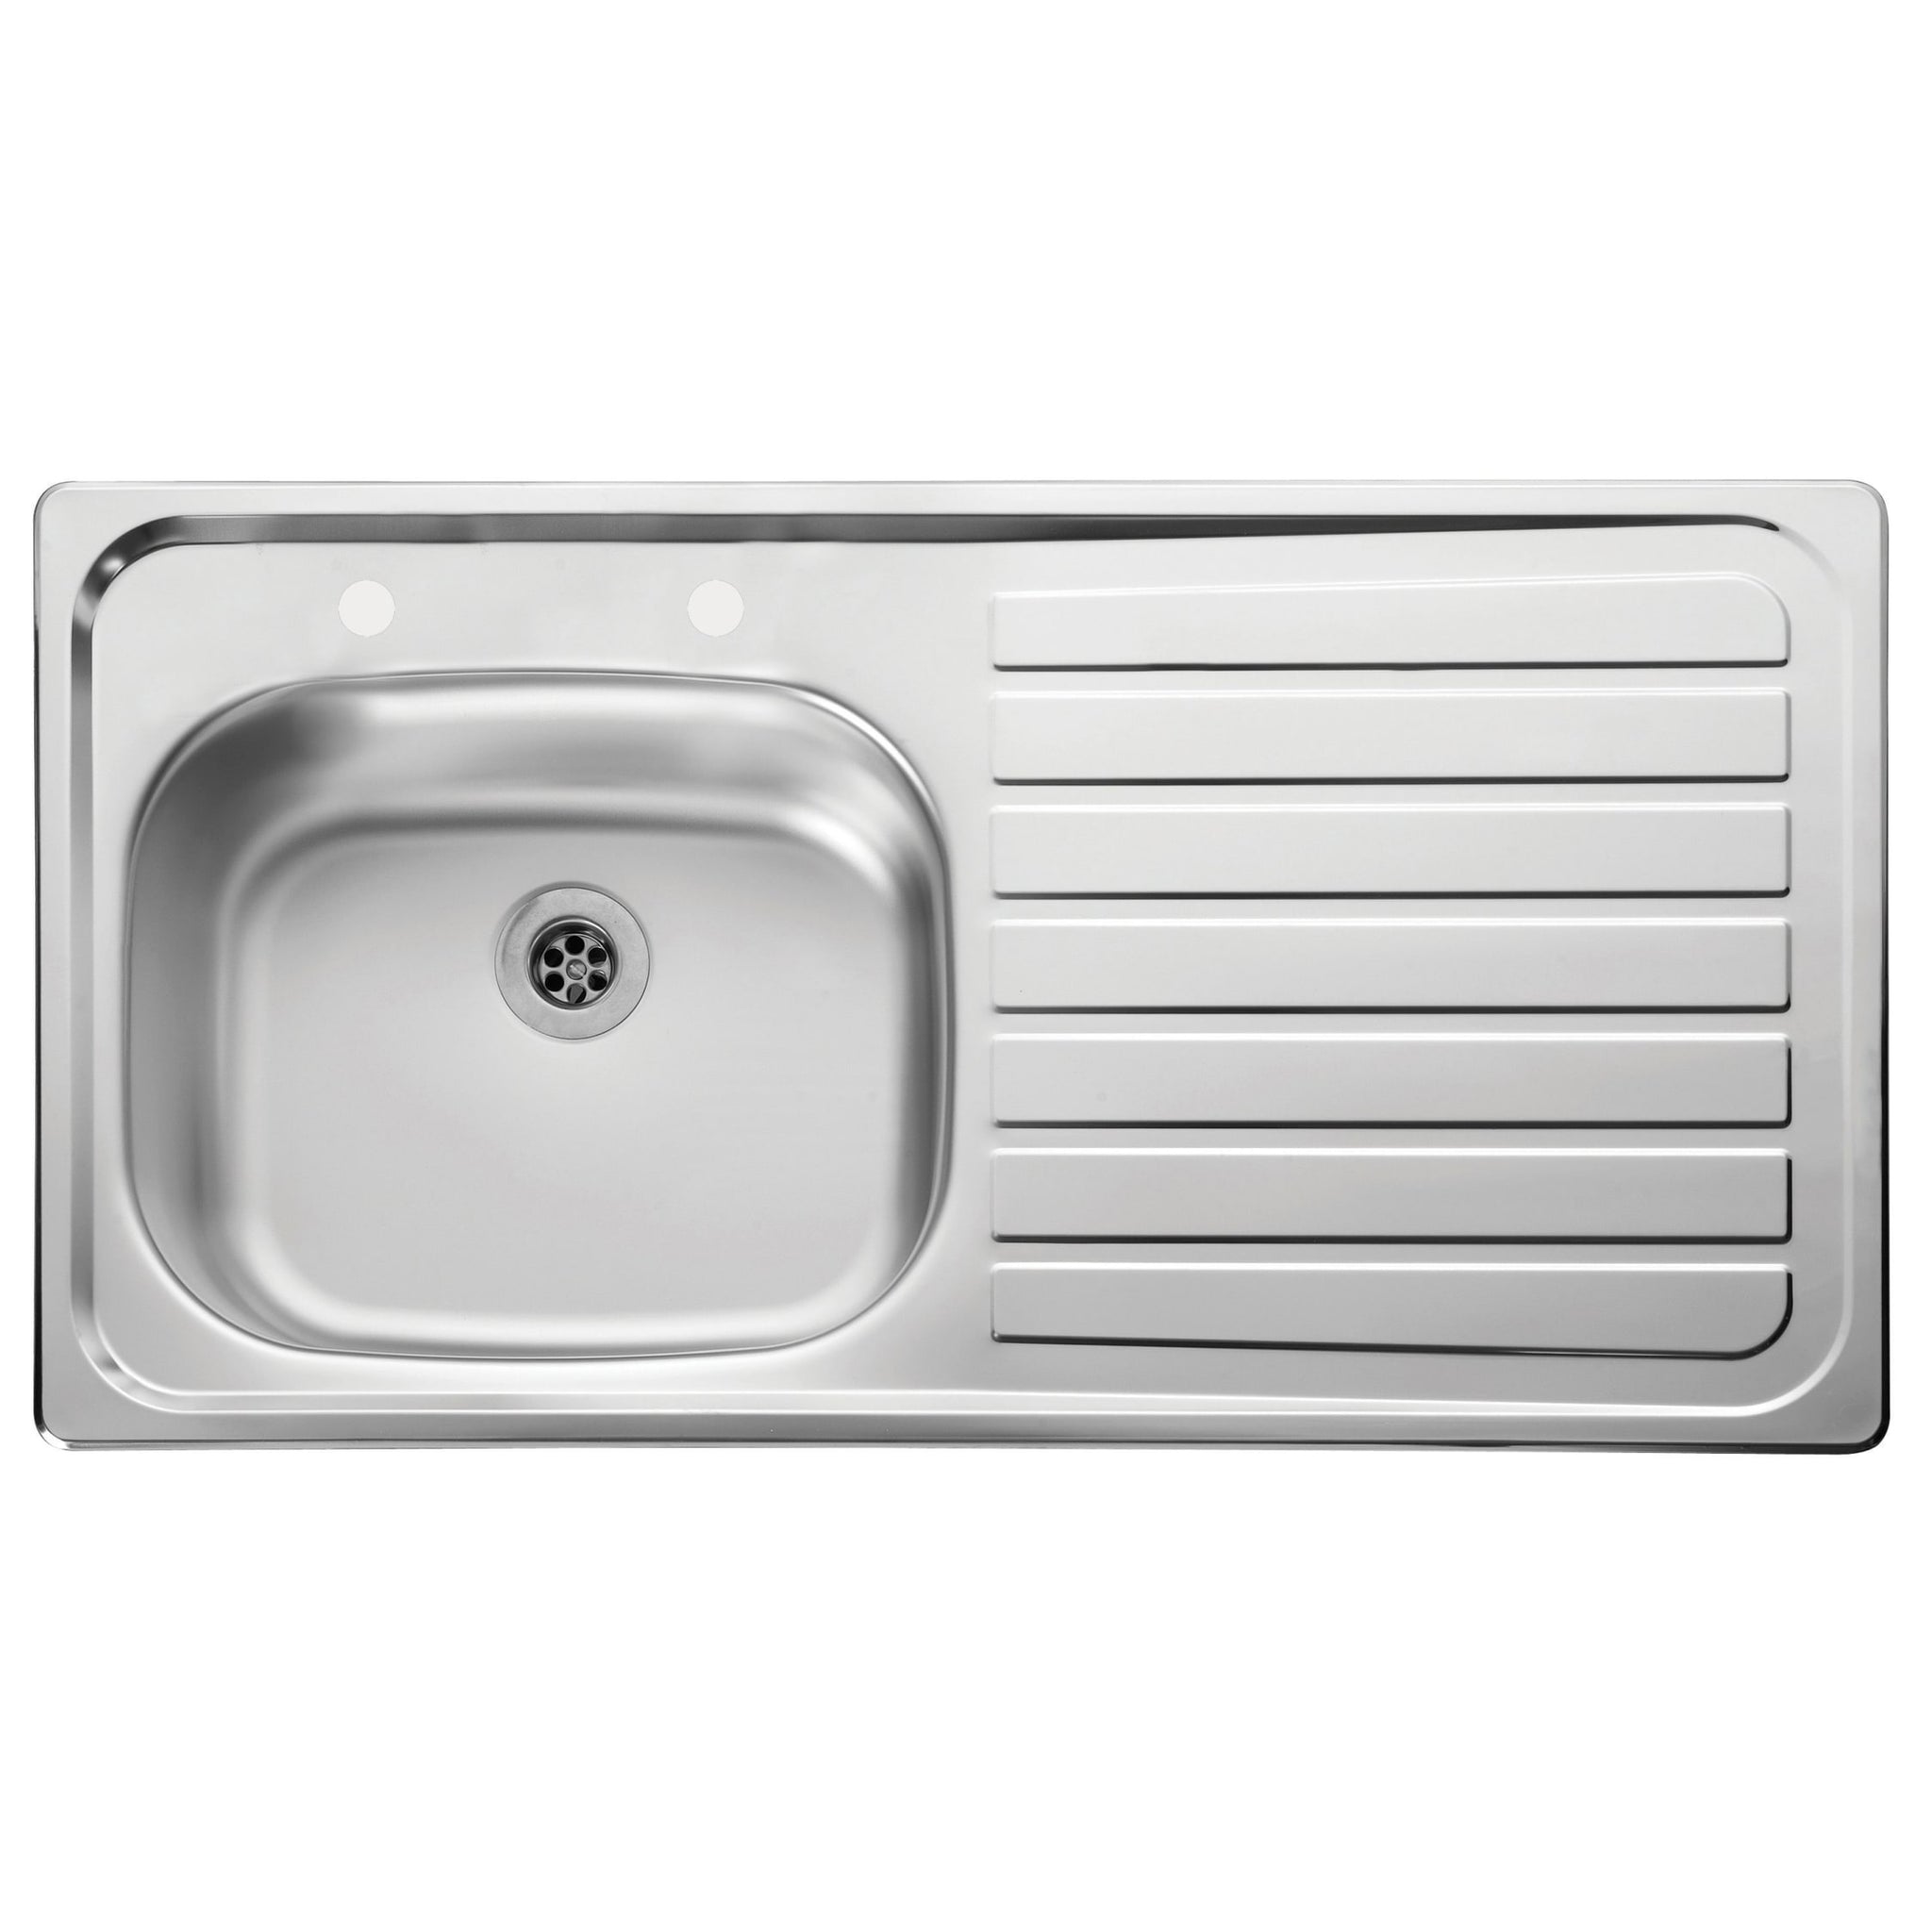 Sink Single Basin With Right Hand Drain Board 32 Inch X 20 Inch X 6 Inch. Equally At Home In Traditional And Modern Kitchens, These Sinks Are Defined By Excellent Quality, Sturdy Construction, And Classic Styling That Complements Any Kitchen Décor. – AUGH018